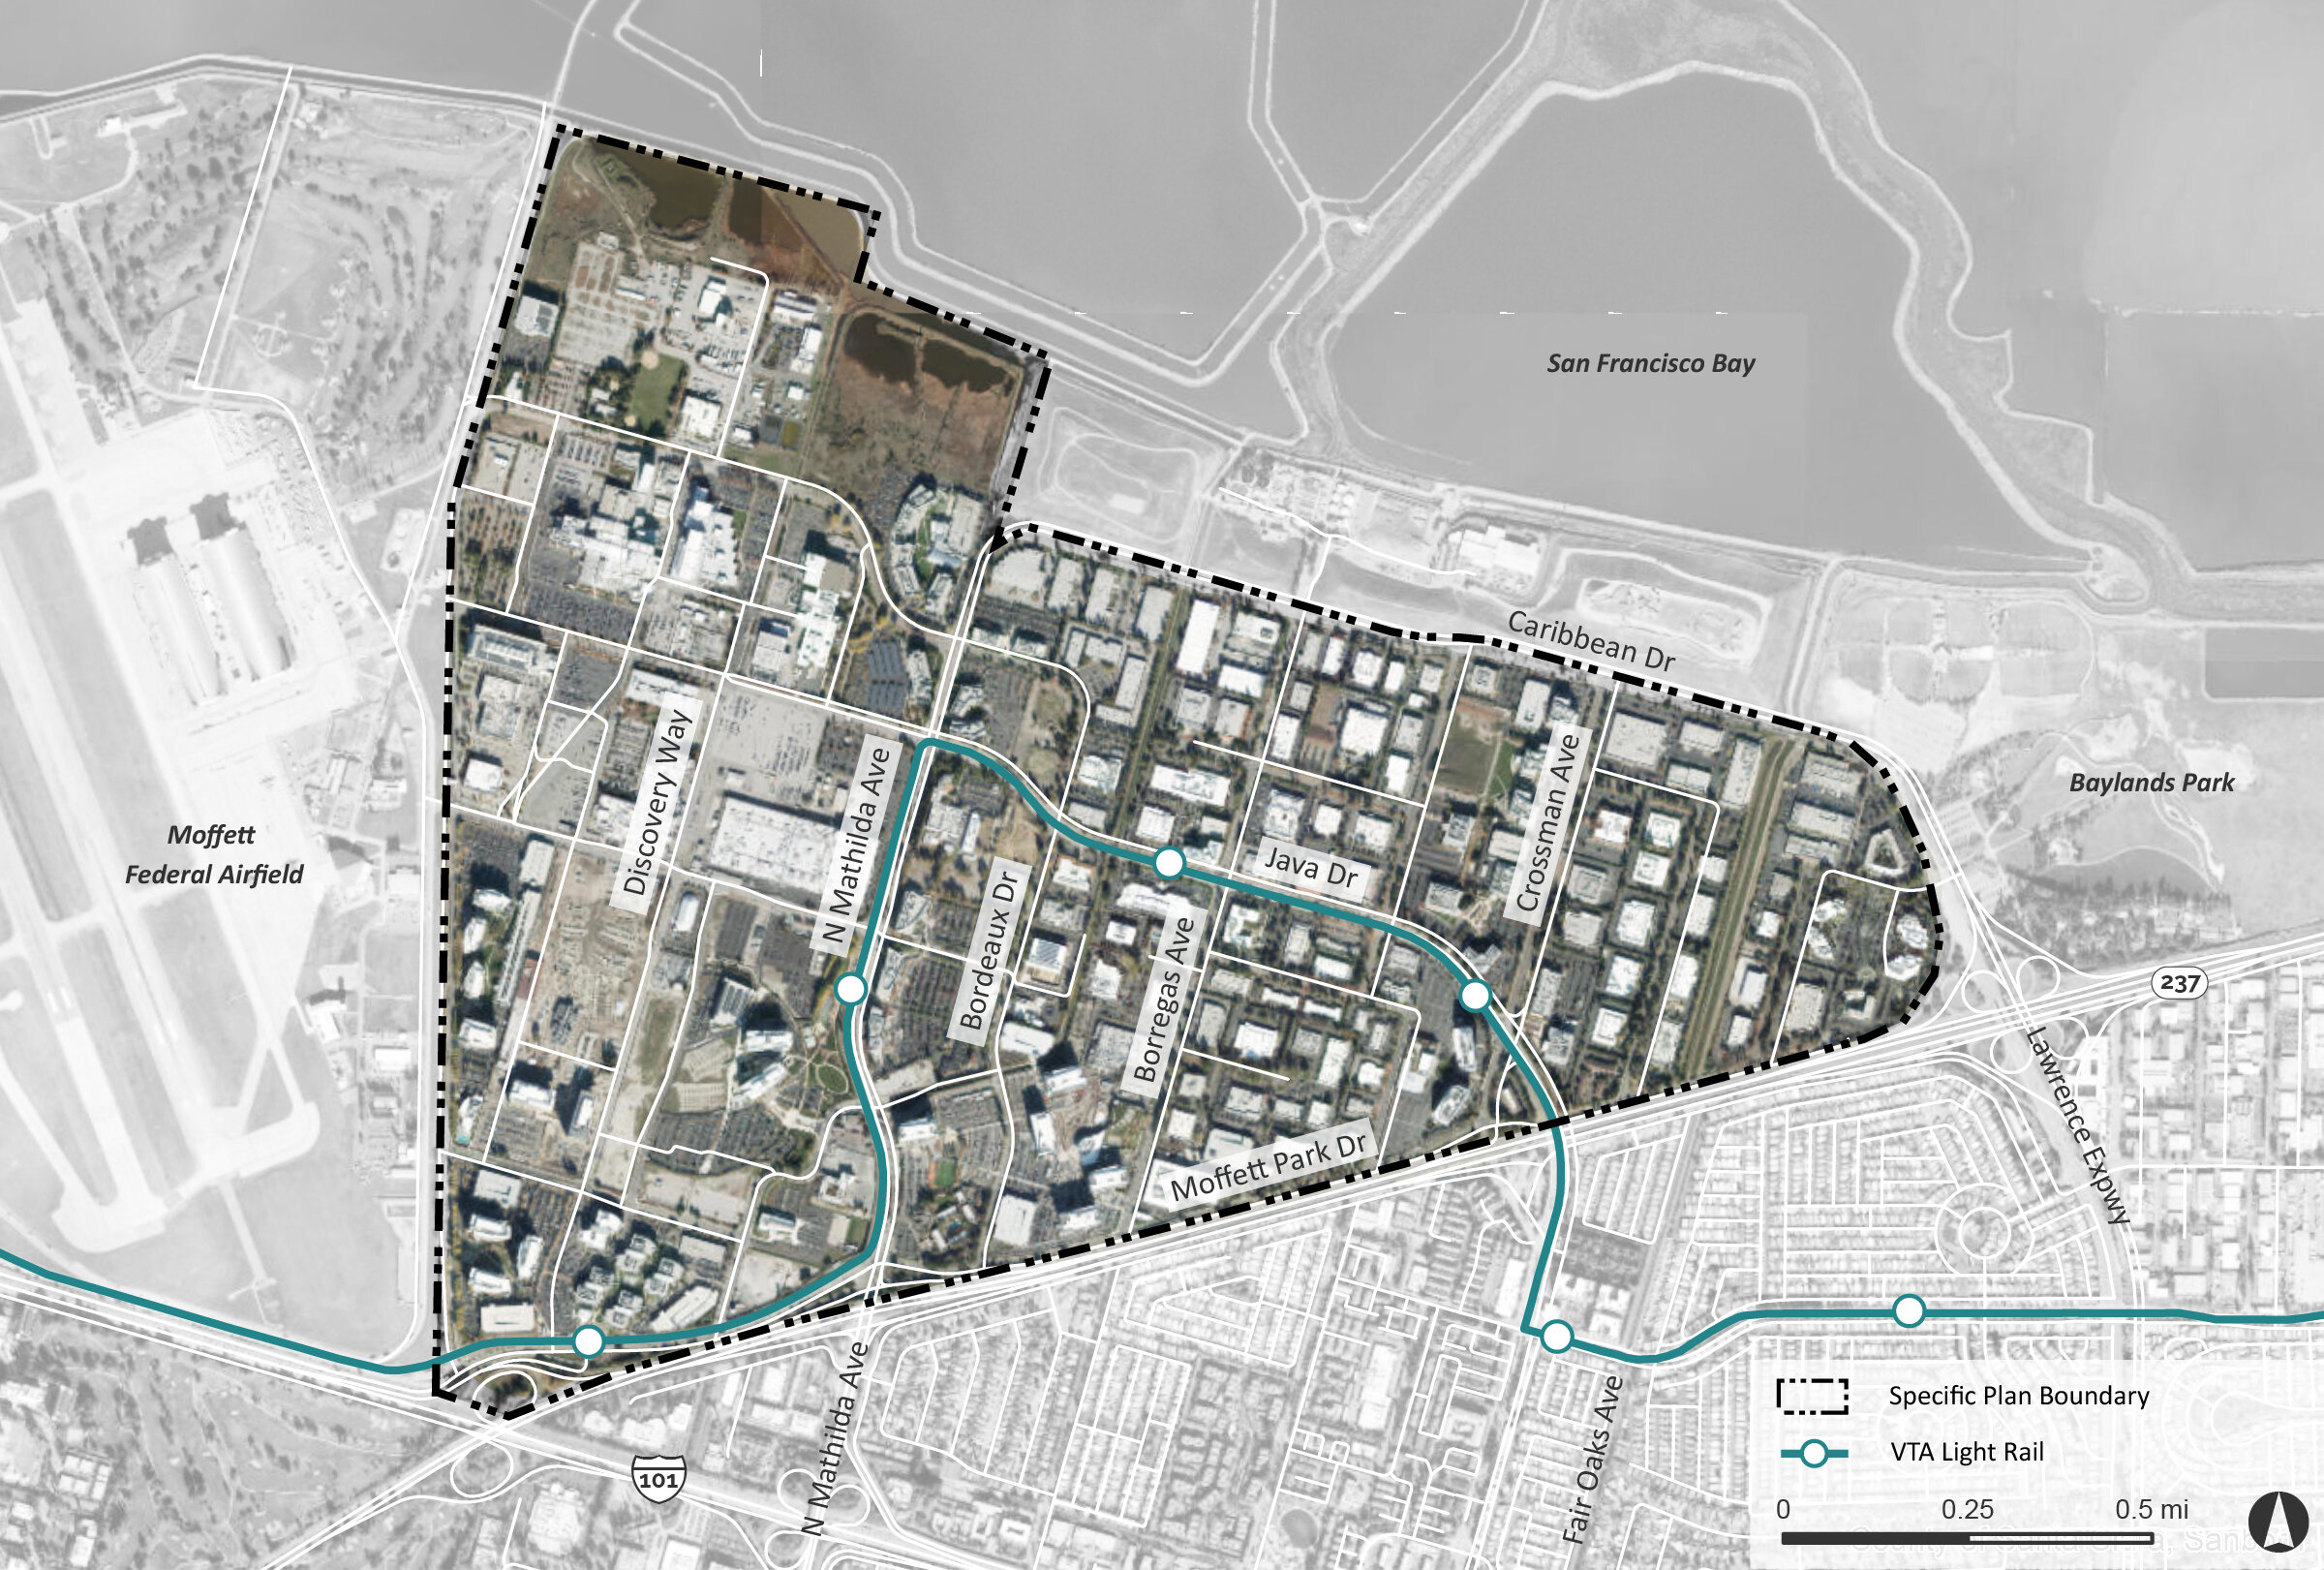 Moffett Park Specific Plan- areal view